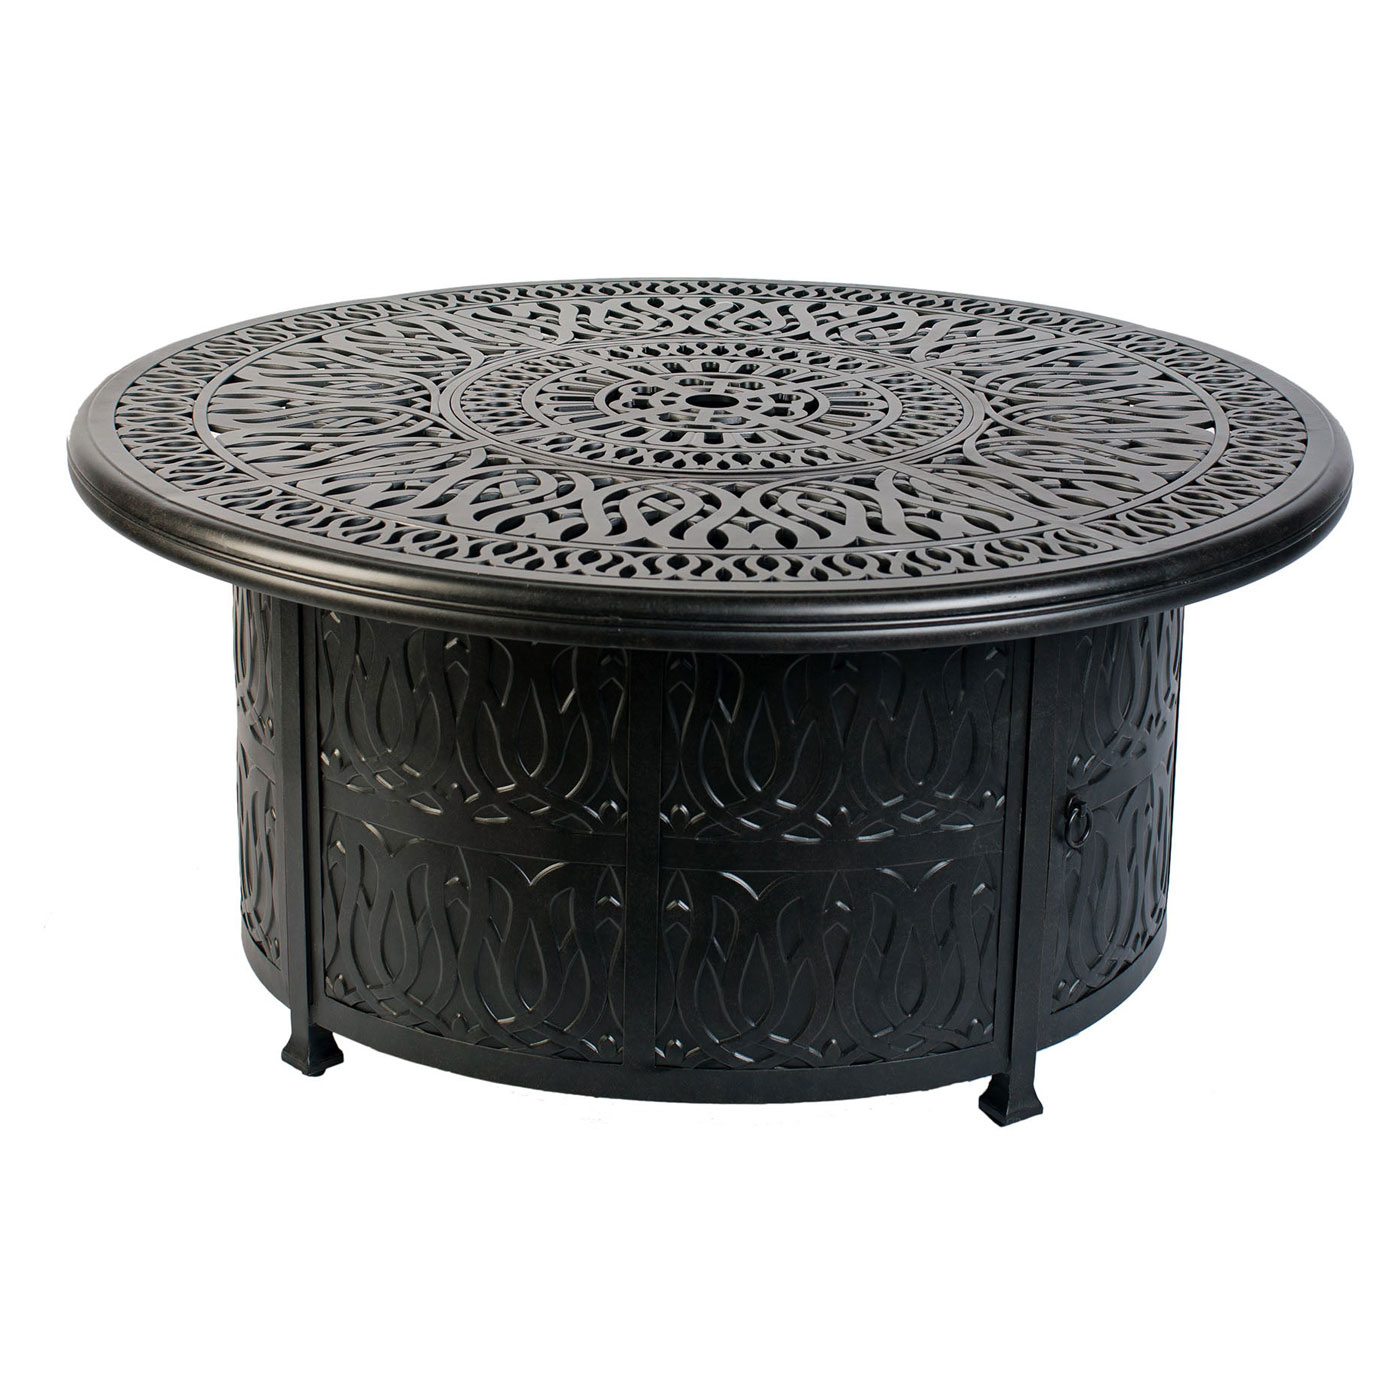 52" Round Chat Wrap Firepit Table Signature (Burner or Ice Bucket Optional)